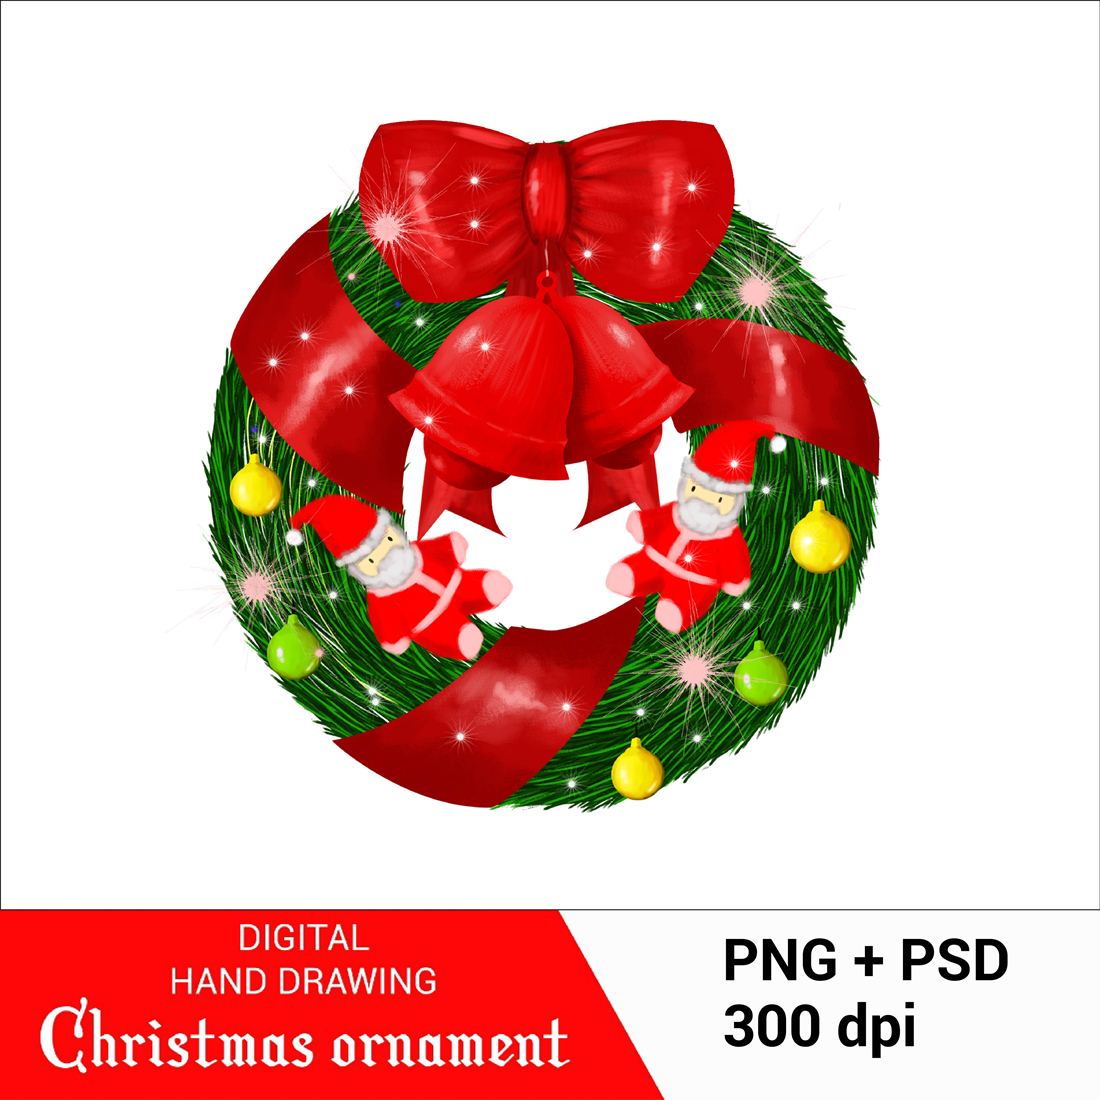 Digital Hand Drawing Christmas Ornament cover image.